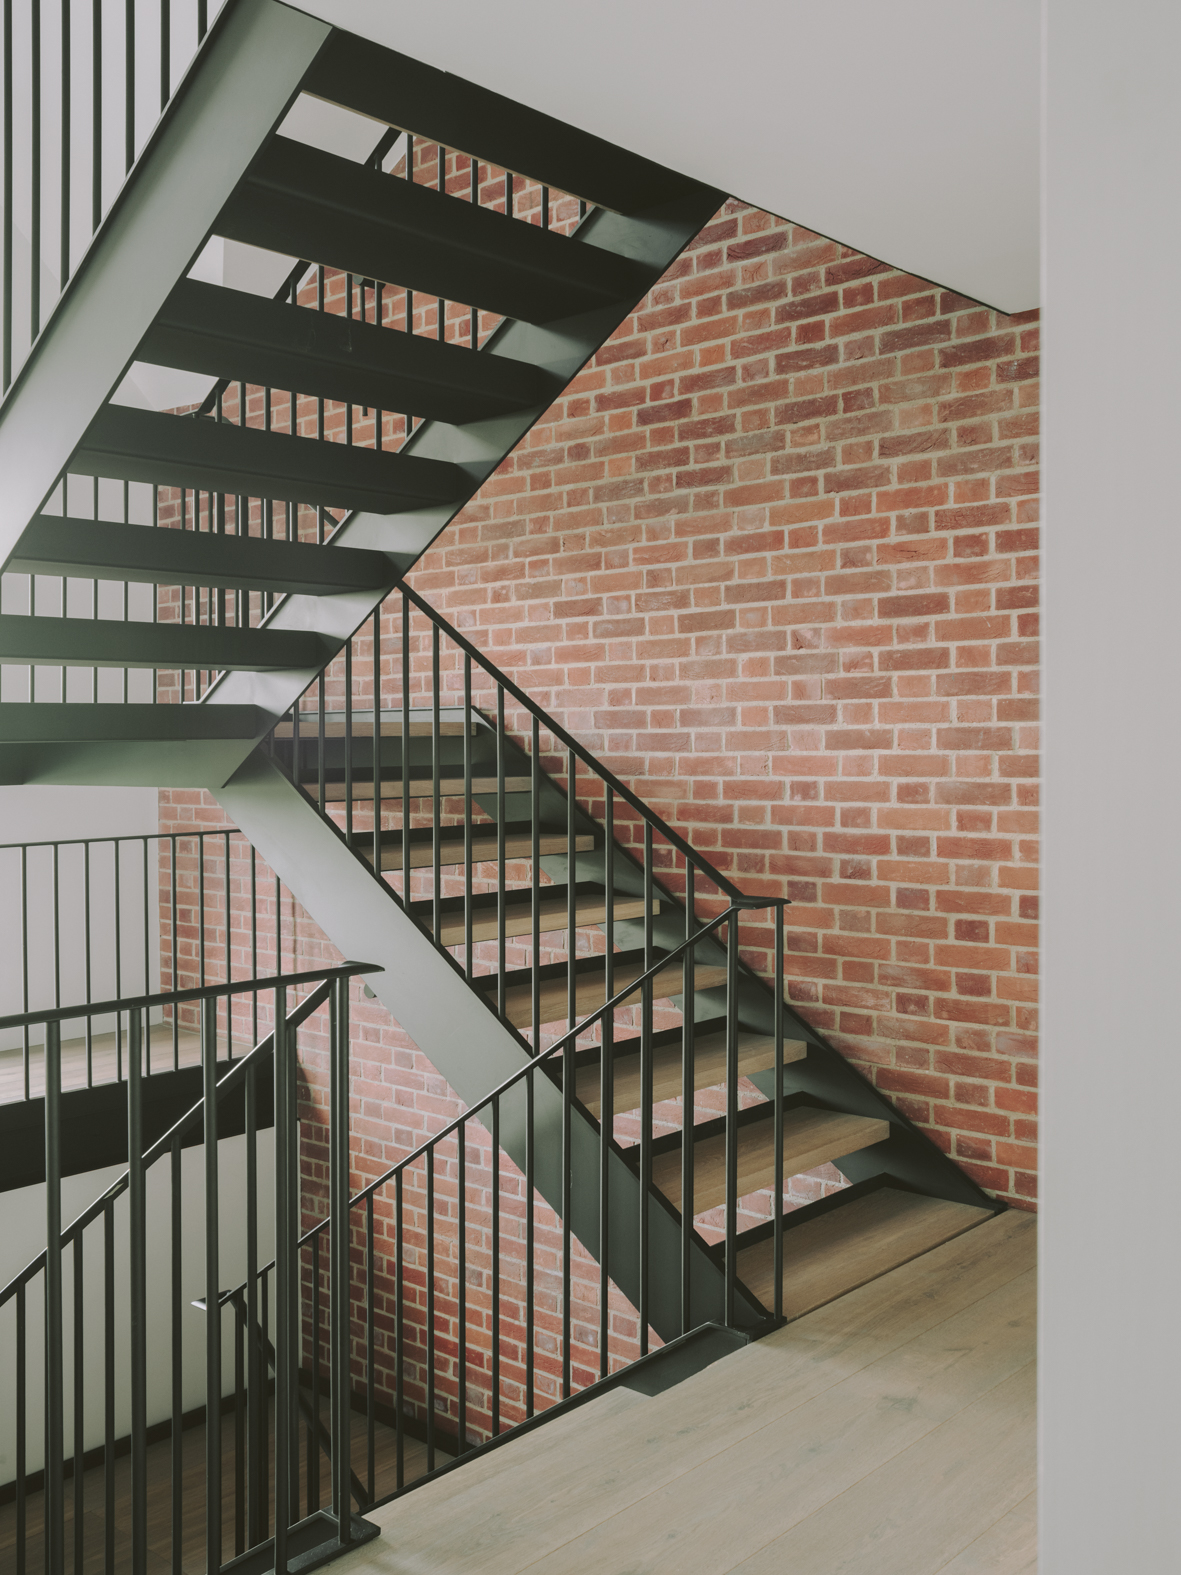 Steel internal staircase with steel balustrade and handrail at Chelwood house.